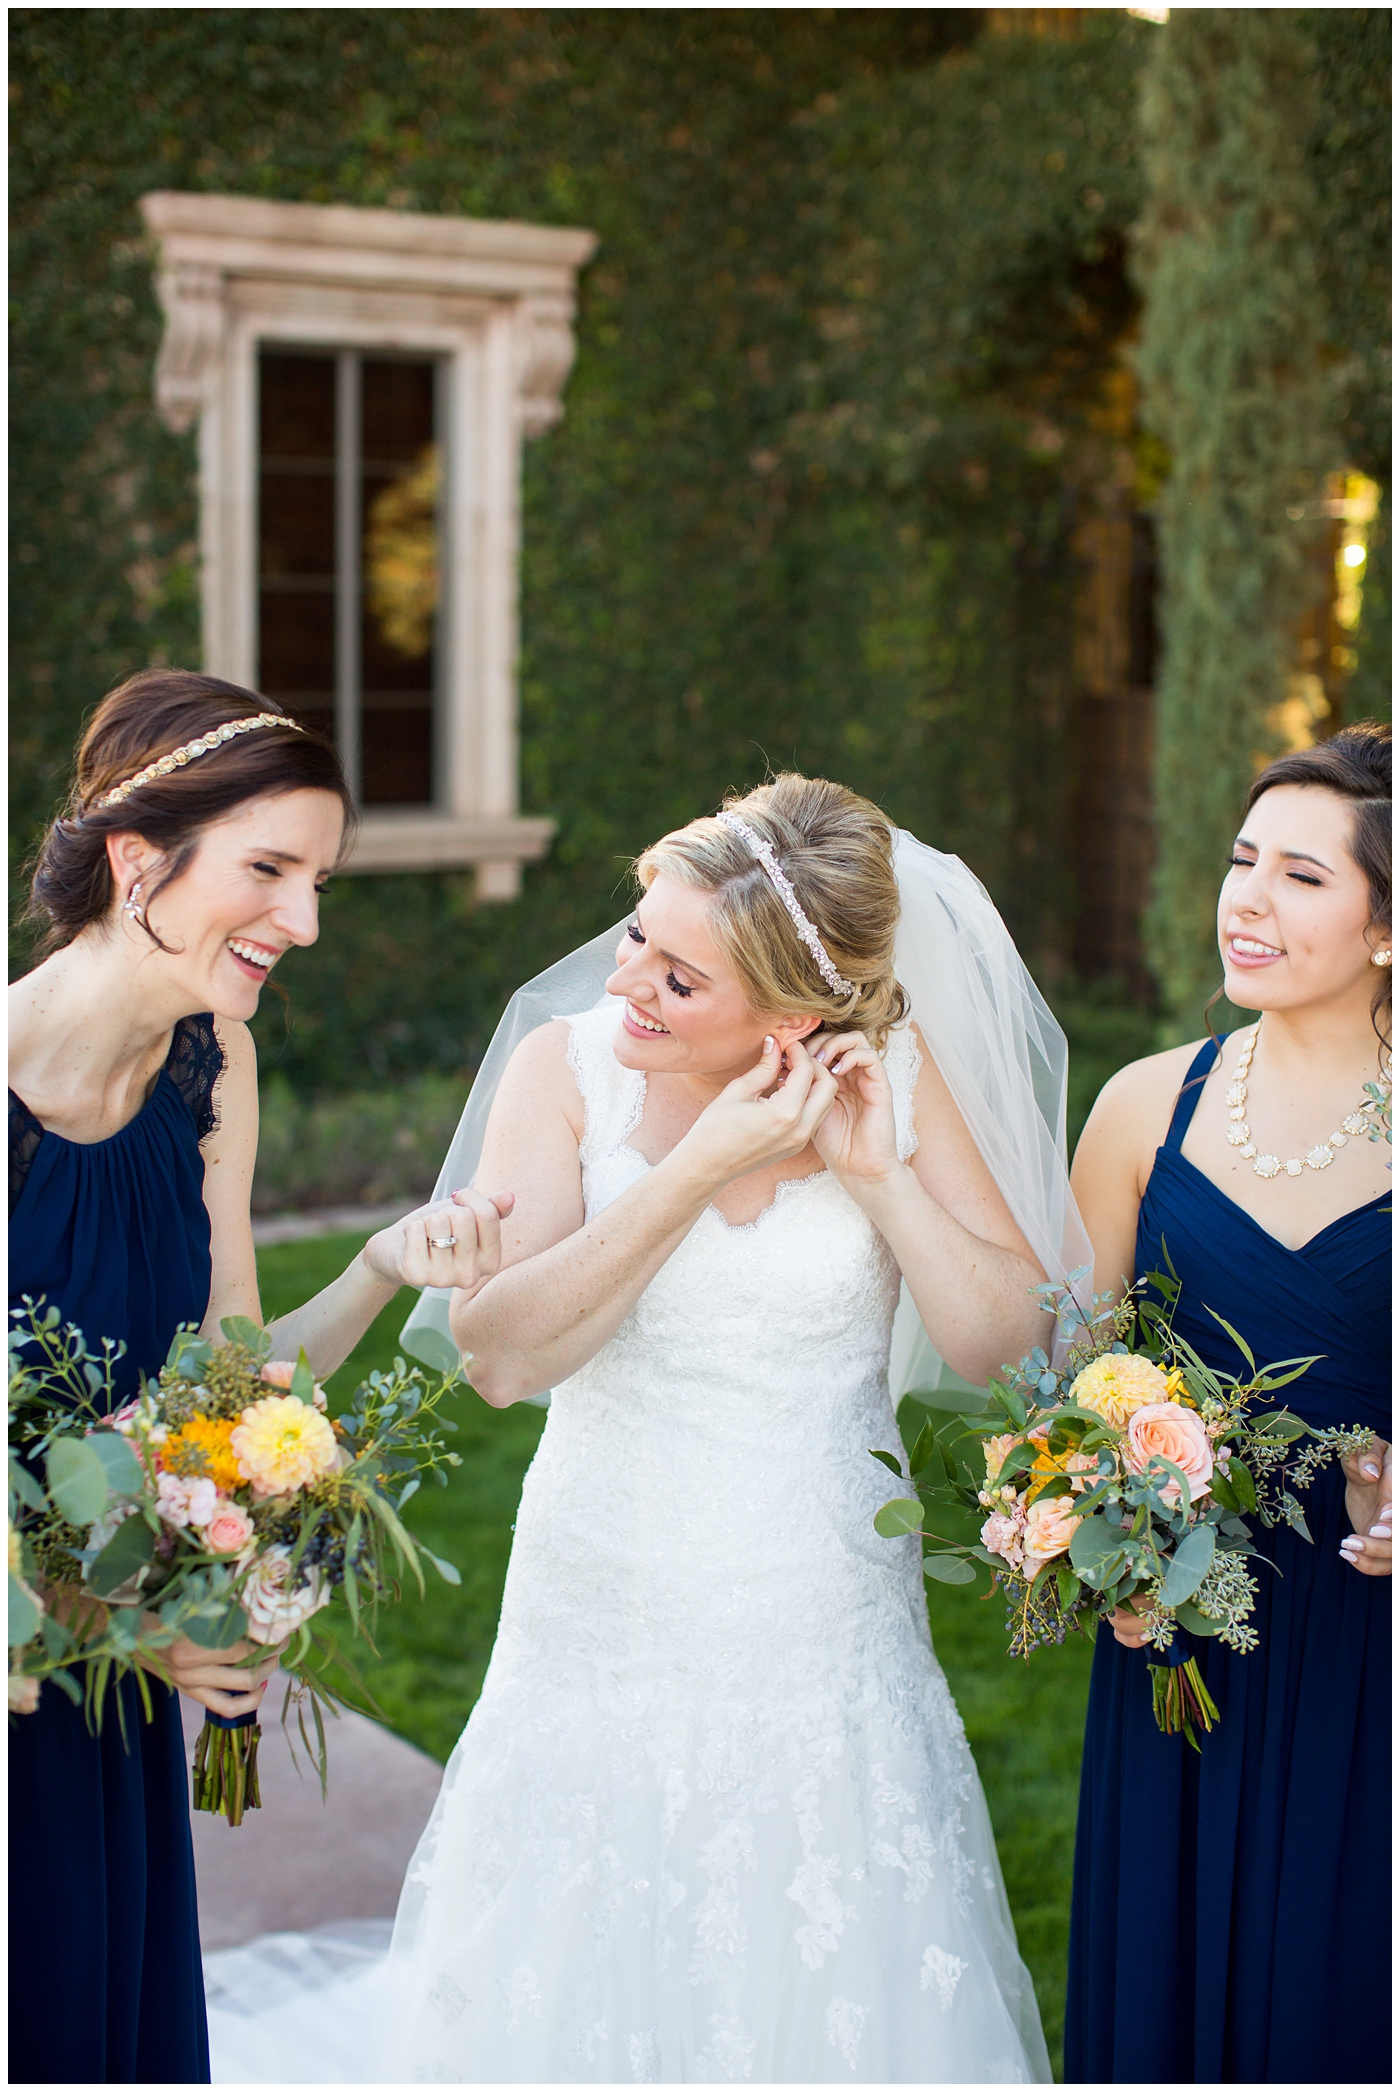 bride in essence designs wedding dress with cap sleeves getting ready with bridesmaids in navy helping